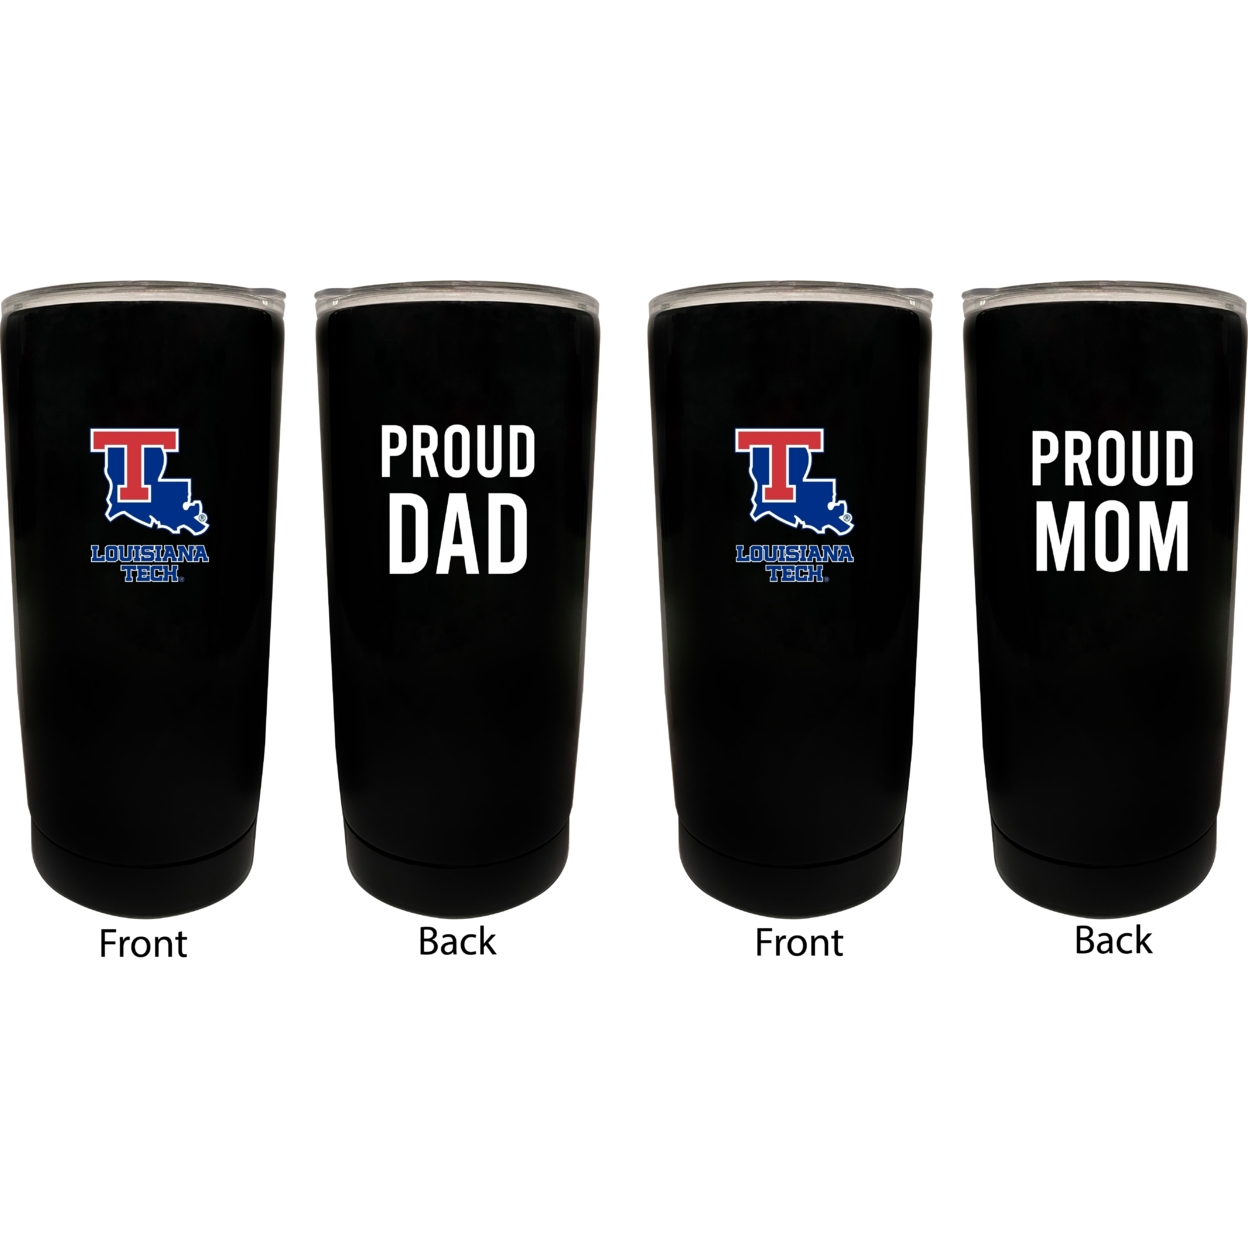 Louisiana Tech Bulldogs Proud Mom And Dad 16 Oz Insulated Stainless Steel Tumblers 2 Pack Black.